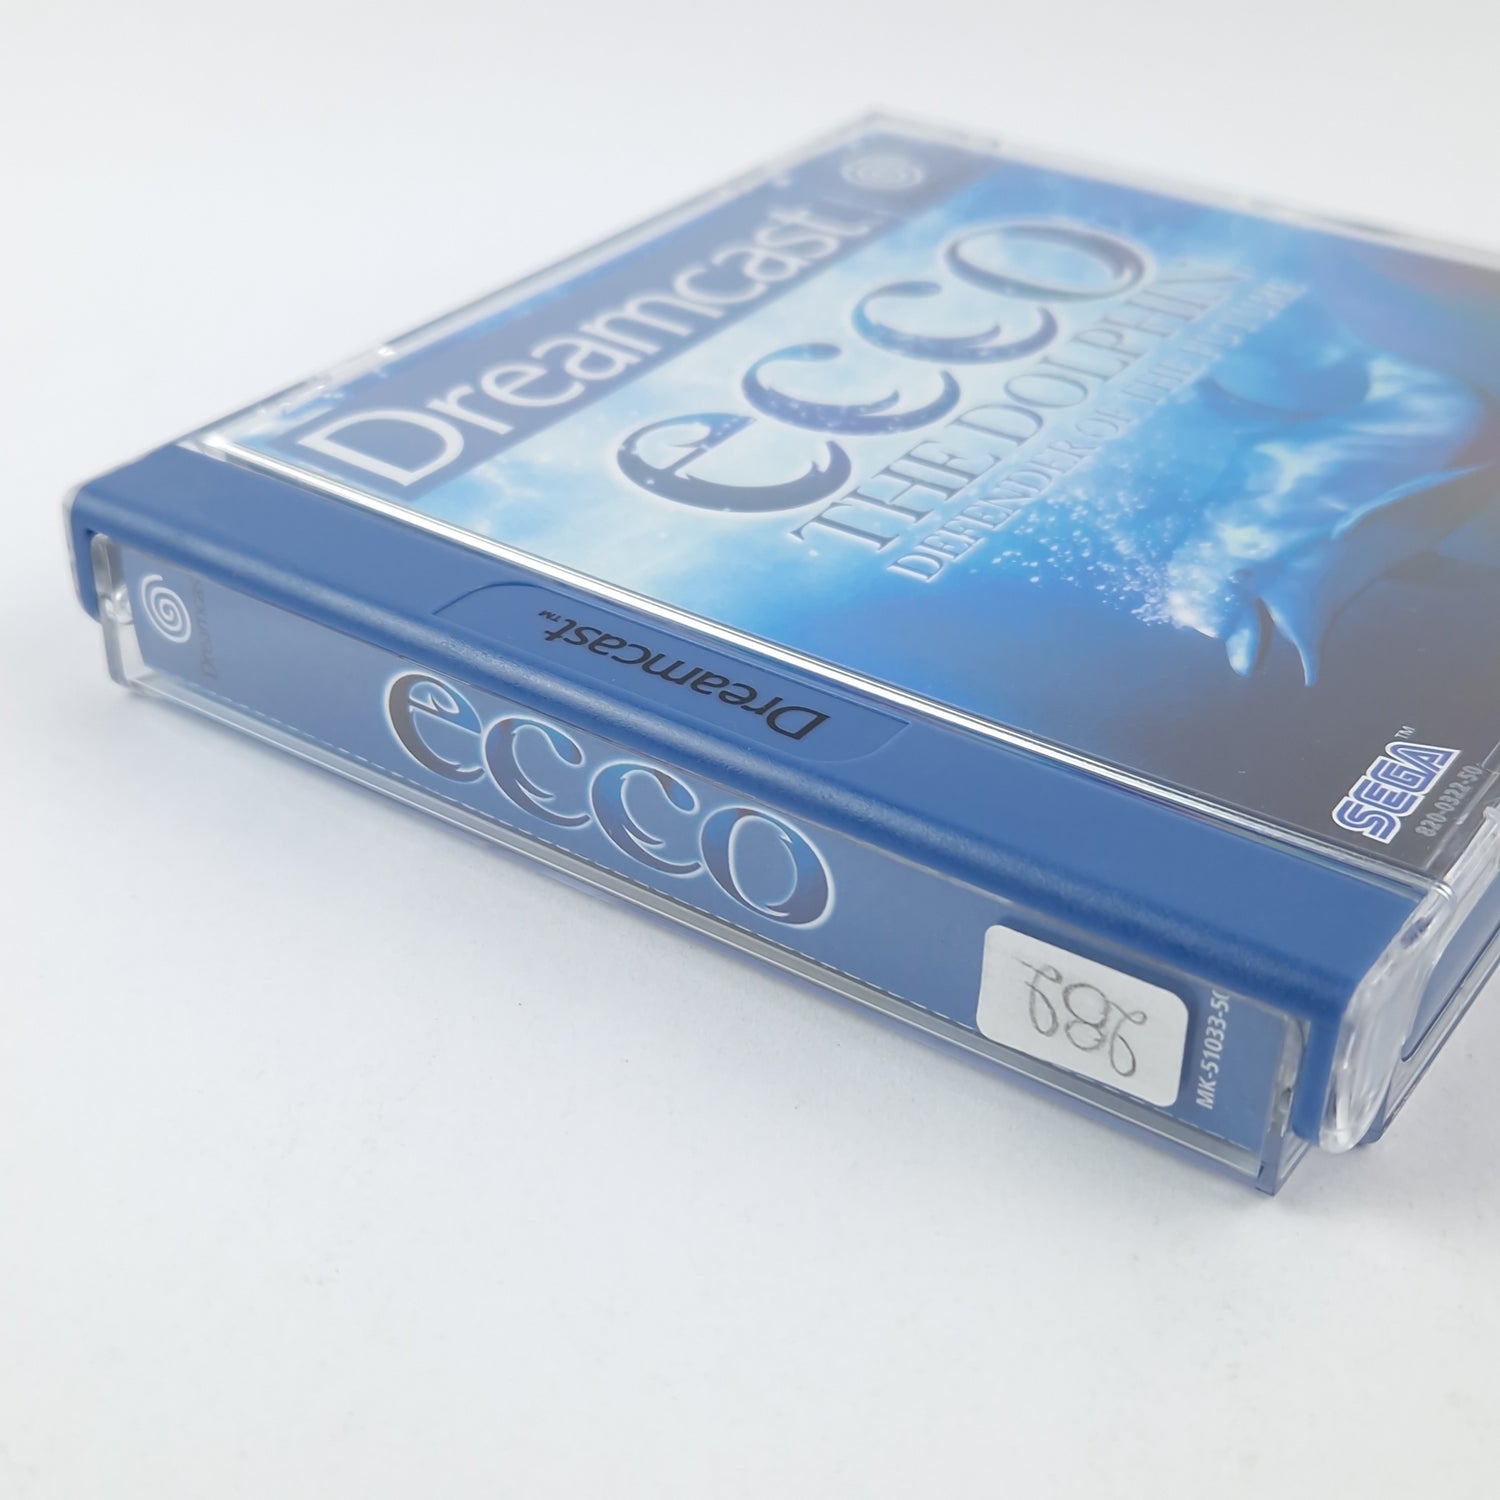 Sega Dreamcast Game: Ecco The Dolphin - CD Instructions OVP / PAL DC